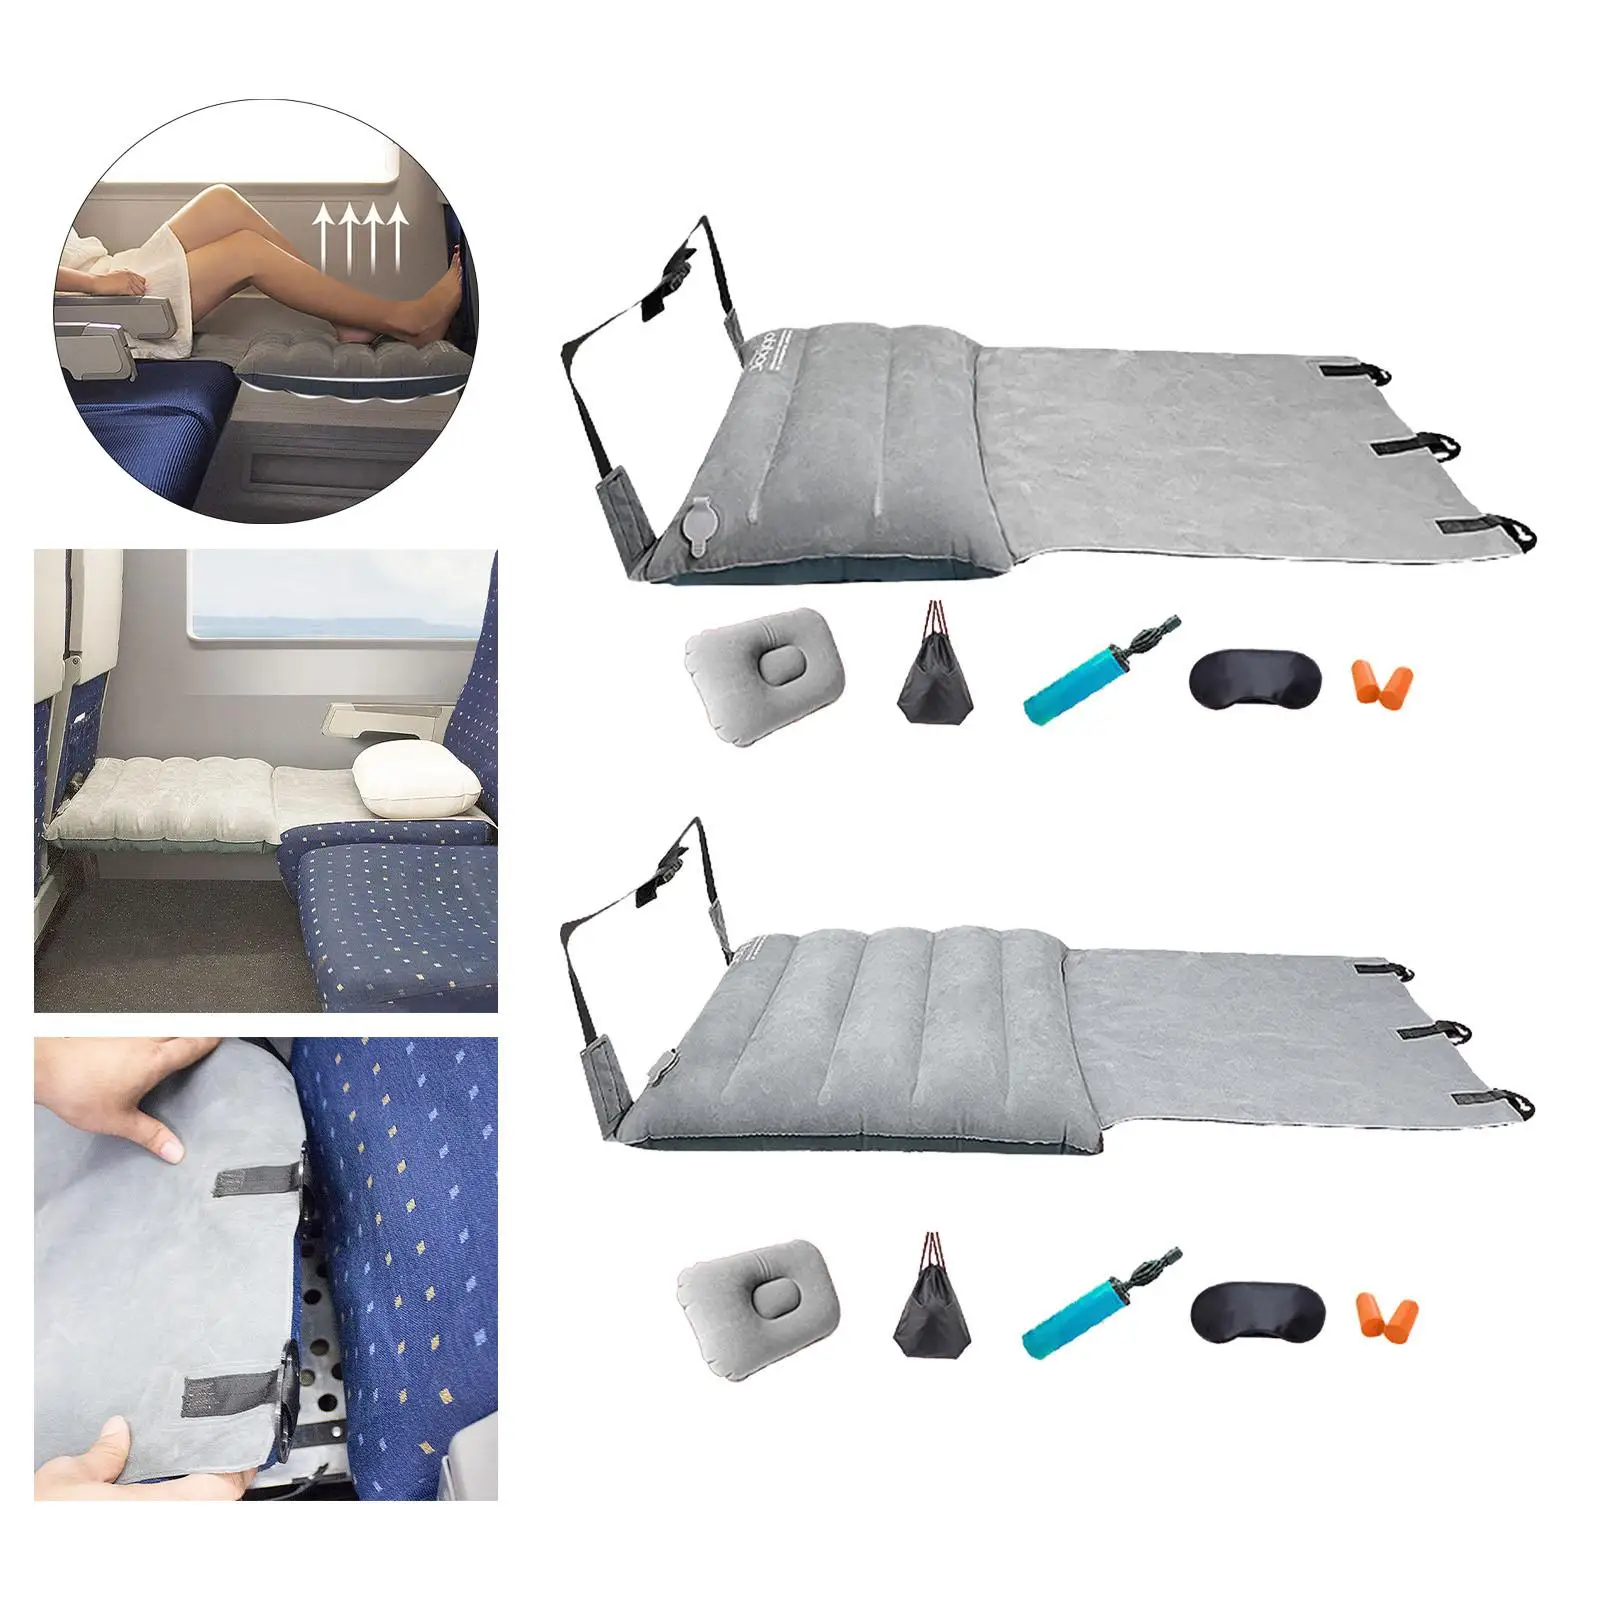 Kids Airplane Footrest Hammock Inflatable High Speed Rail Strong Load Bearing Travel Accessories Leg Rest Travel Foot Rest